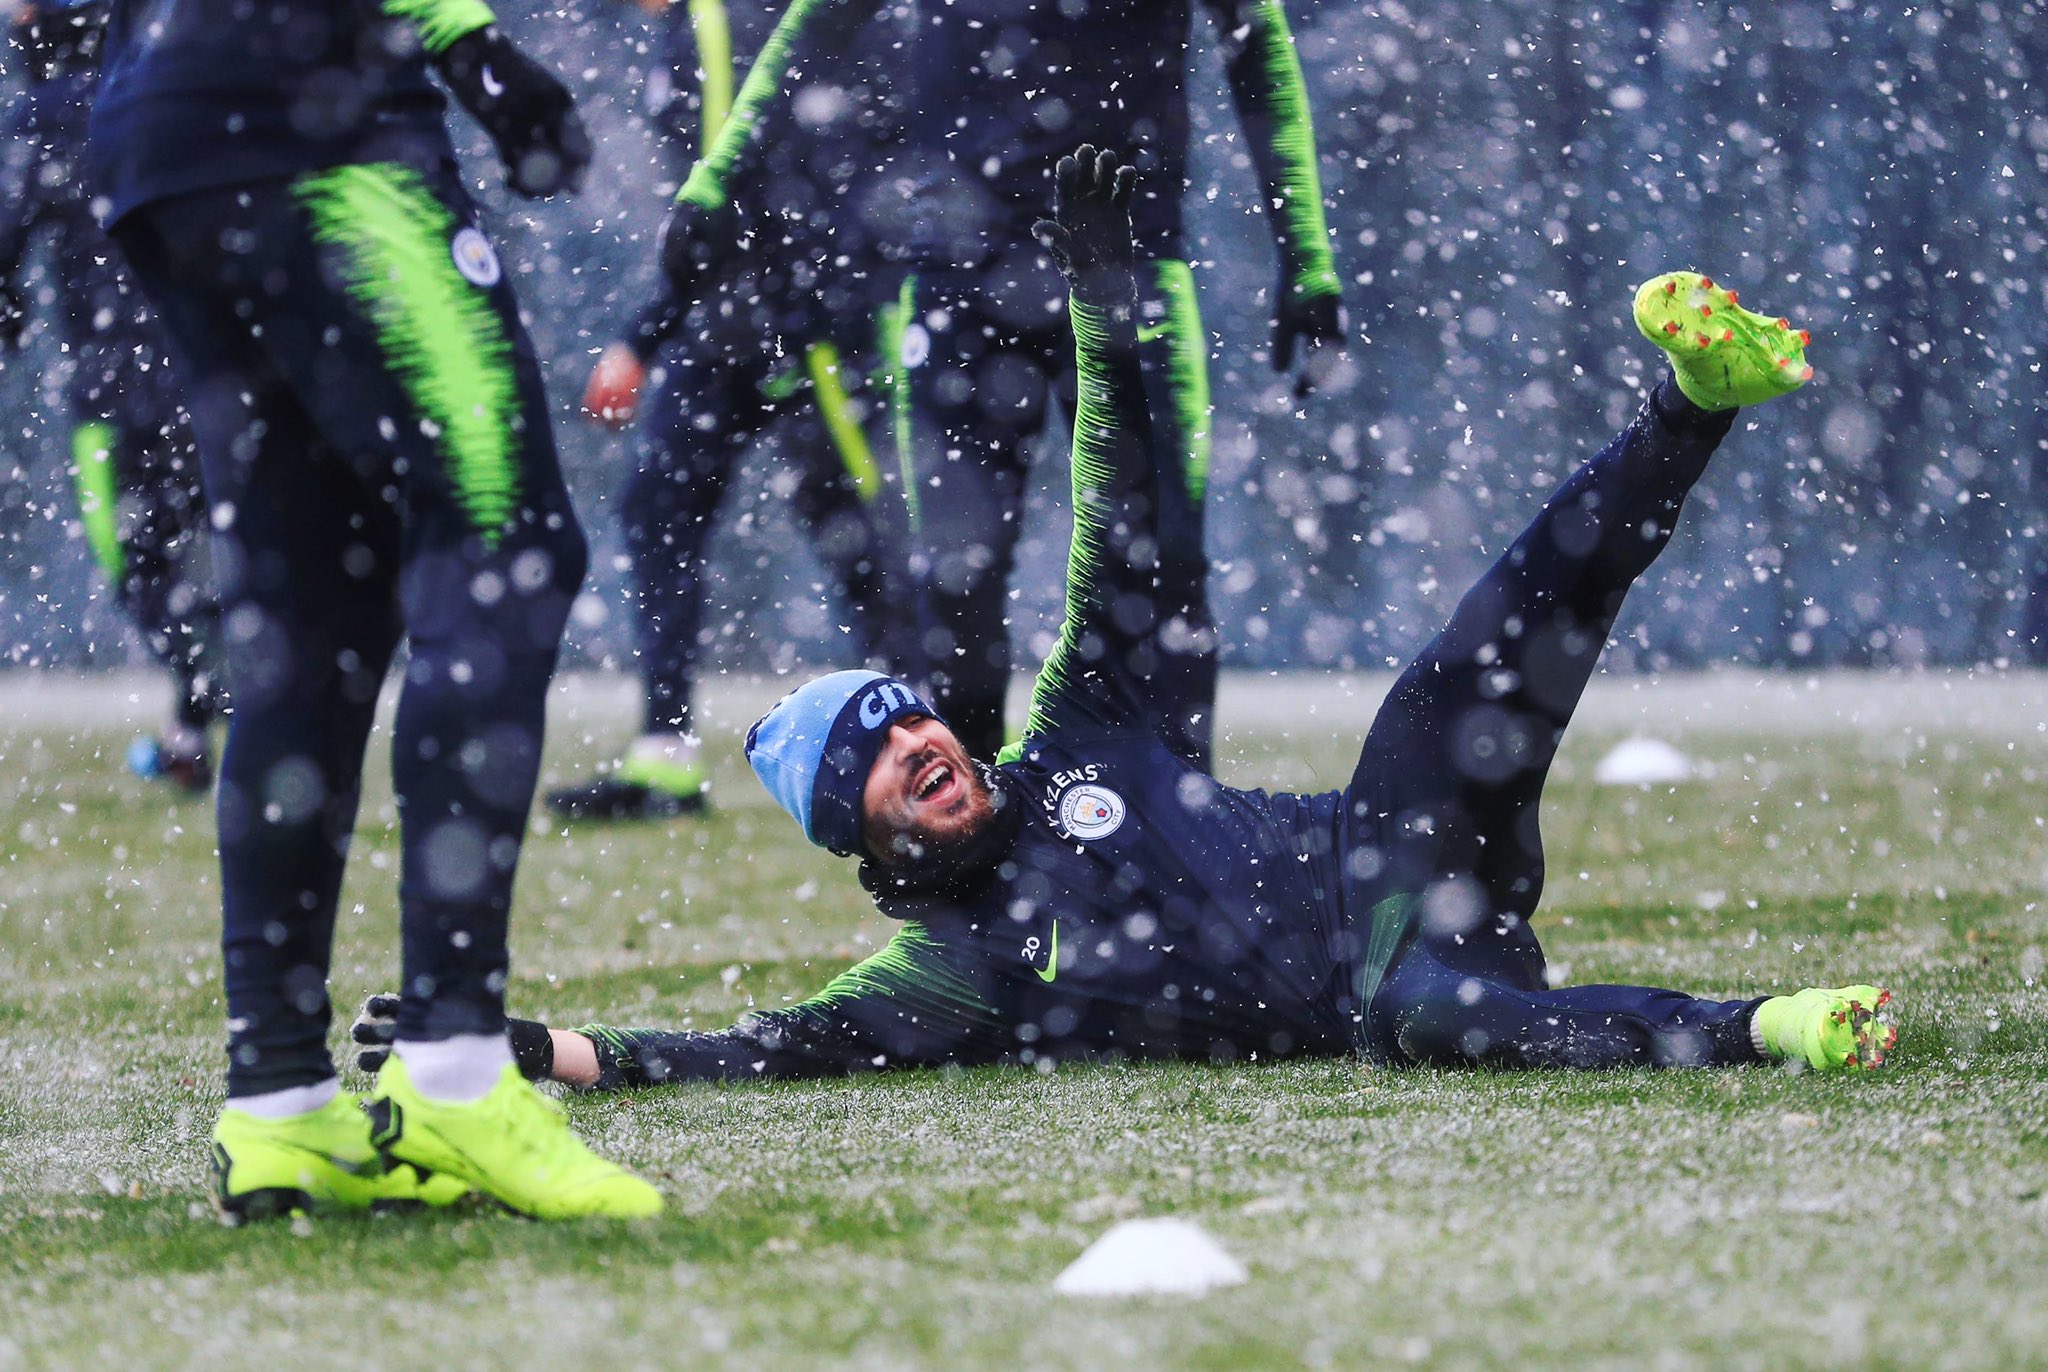 Bernardo Silva On Twitter When It S Freezing Outside But At Least You Can Slide With Style